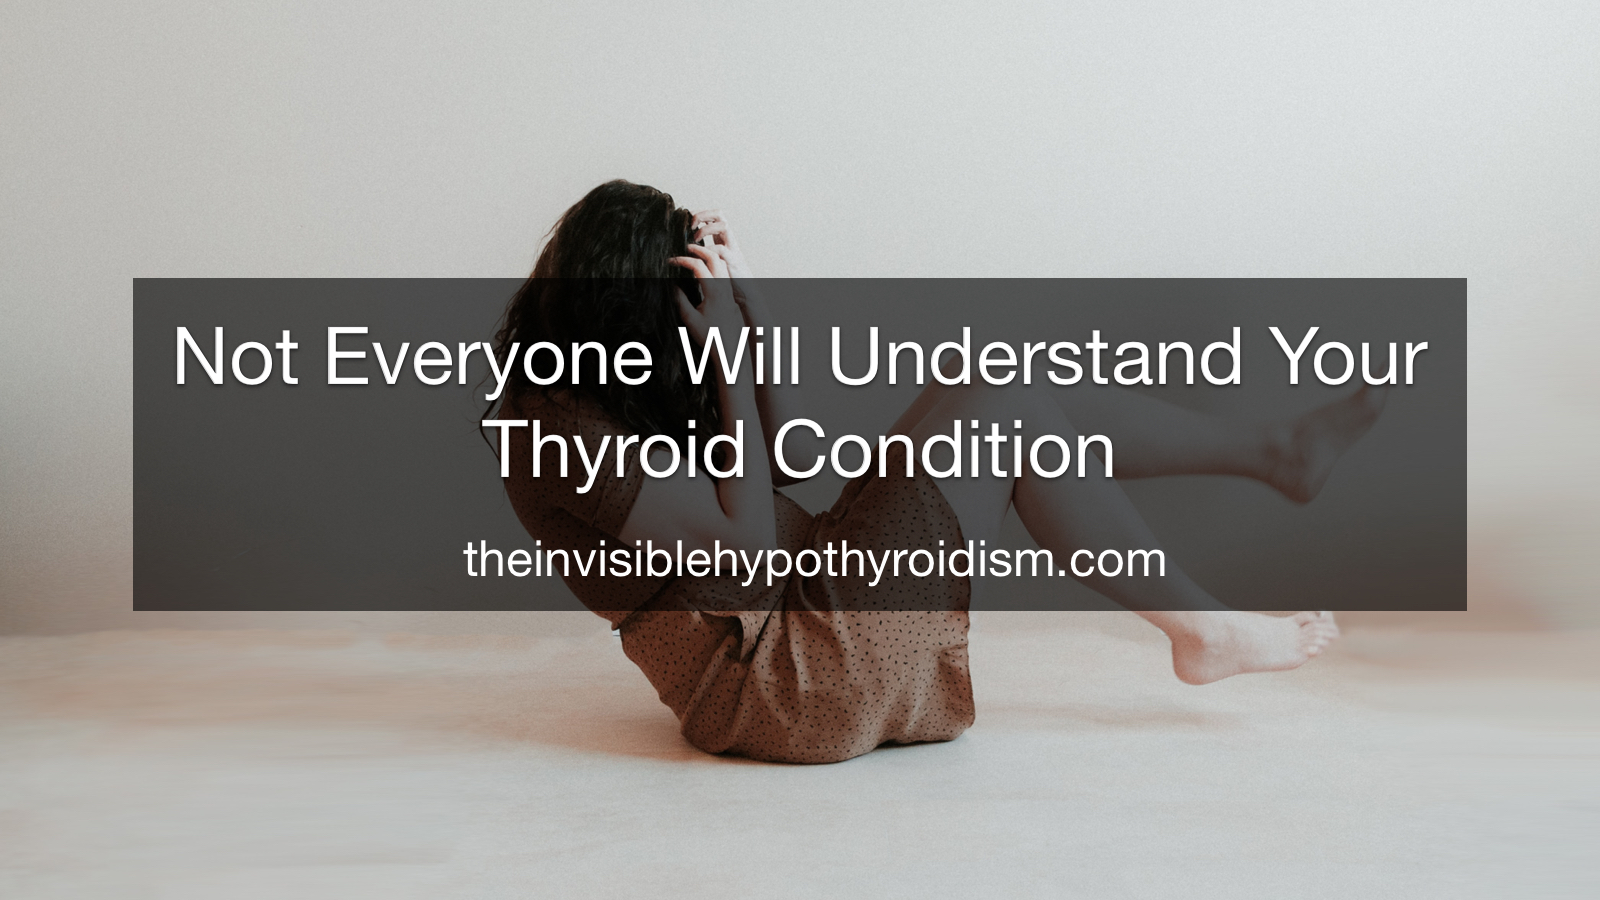 Not Everyone Will Understand Your Thyroid Condition